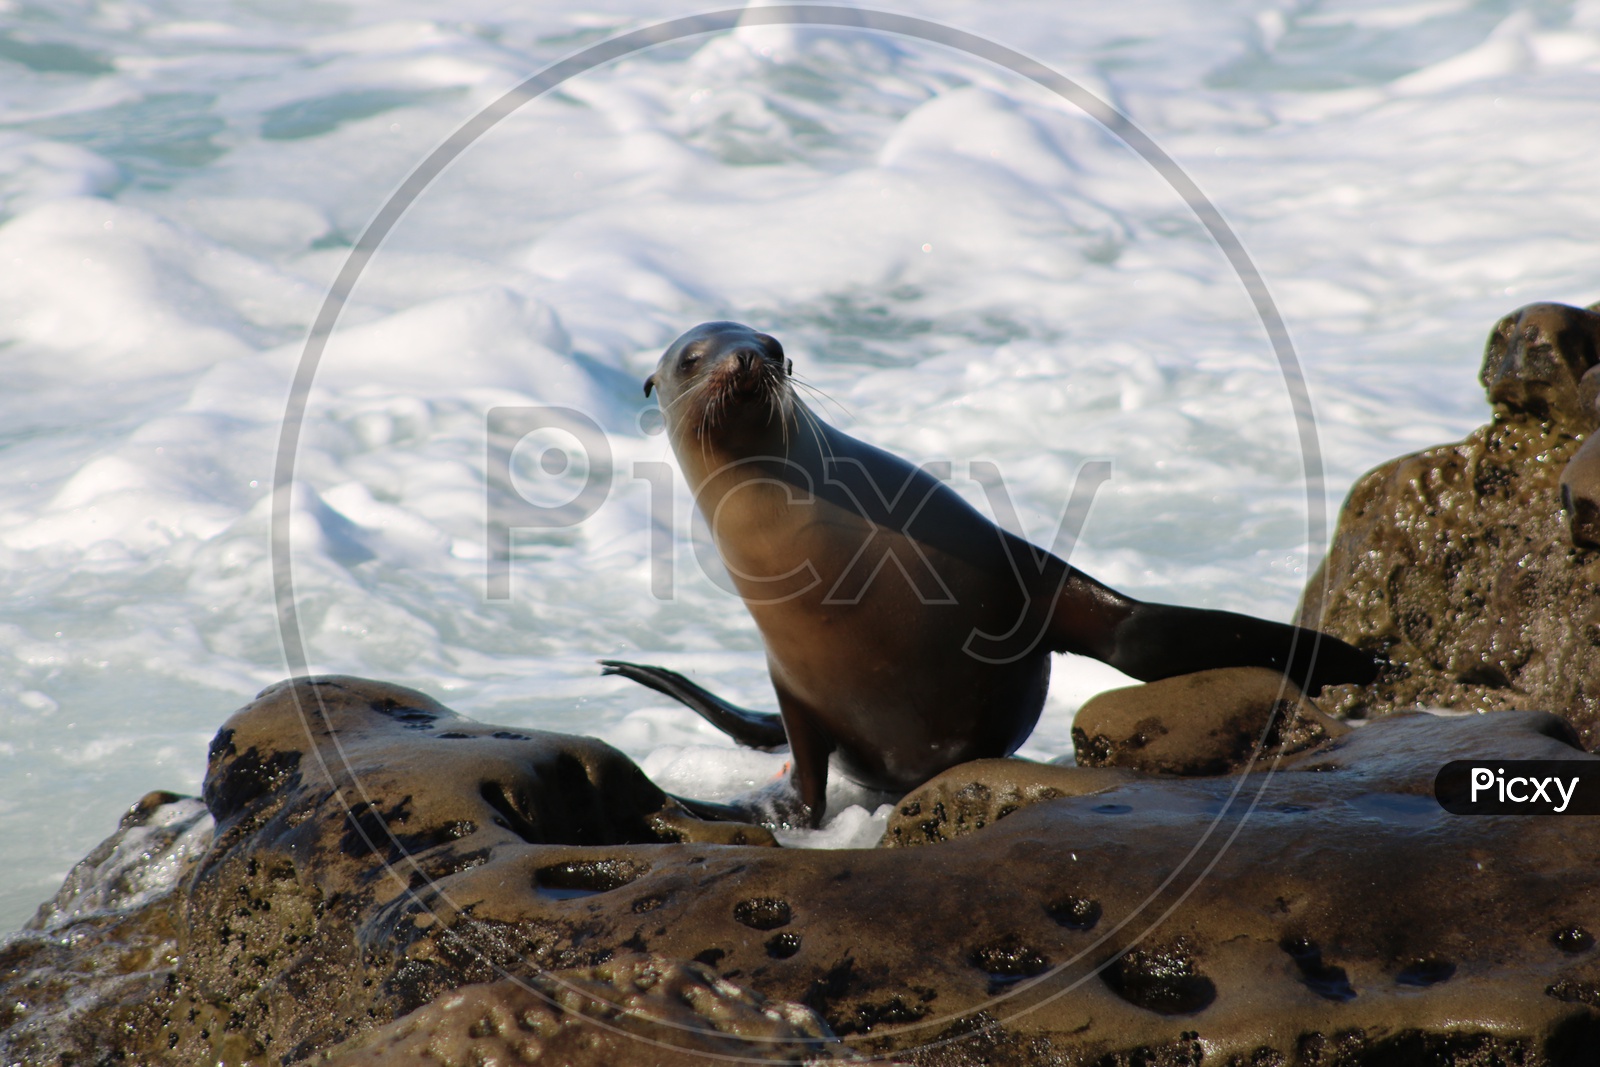 Sea lion just out of water